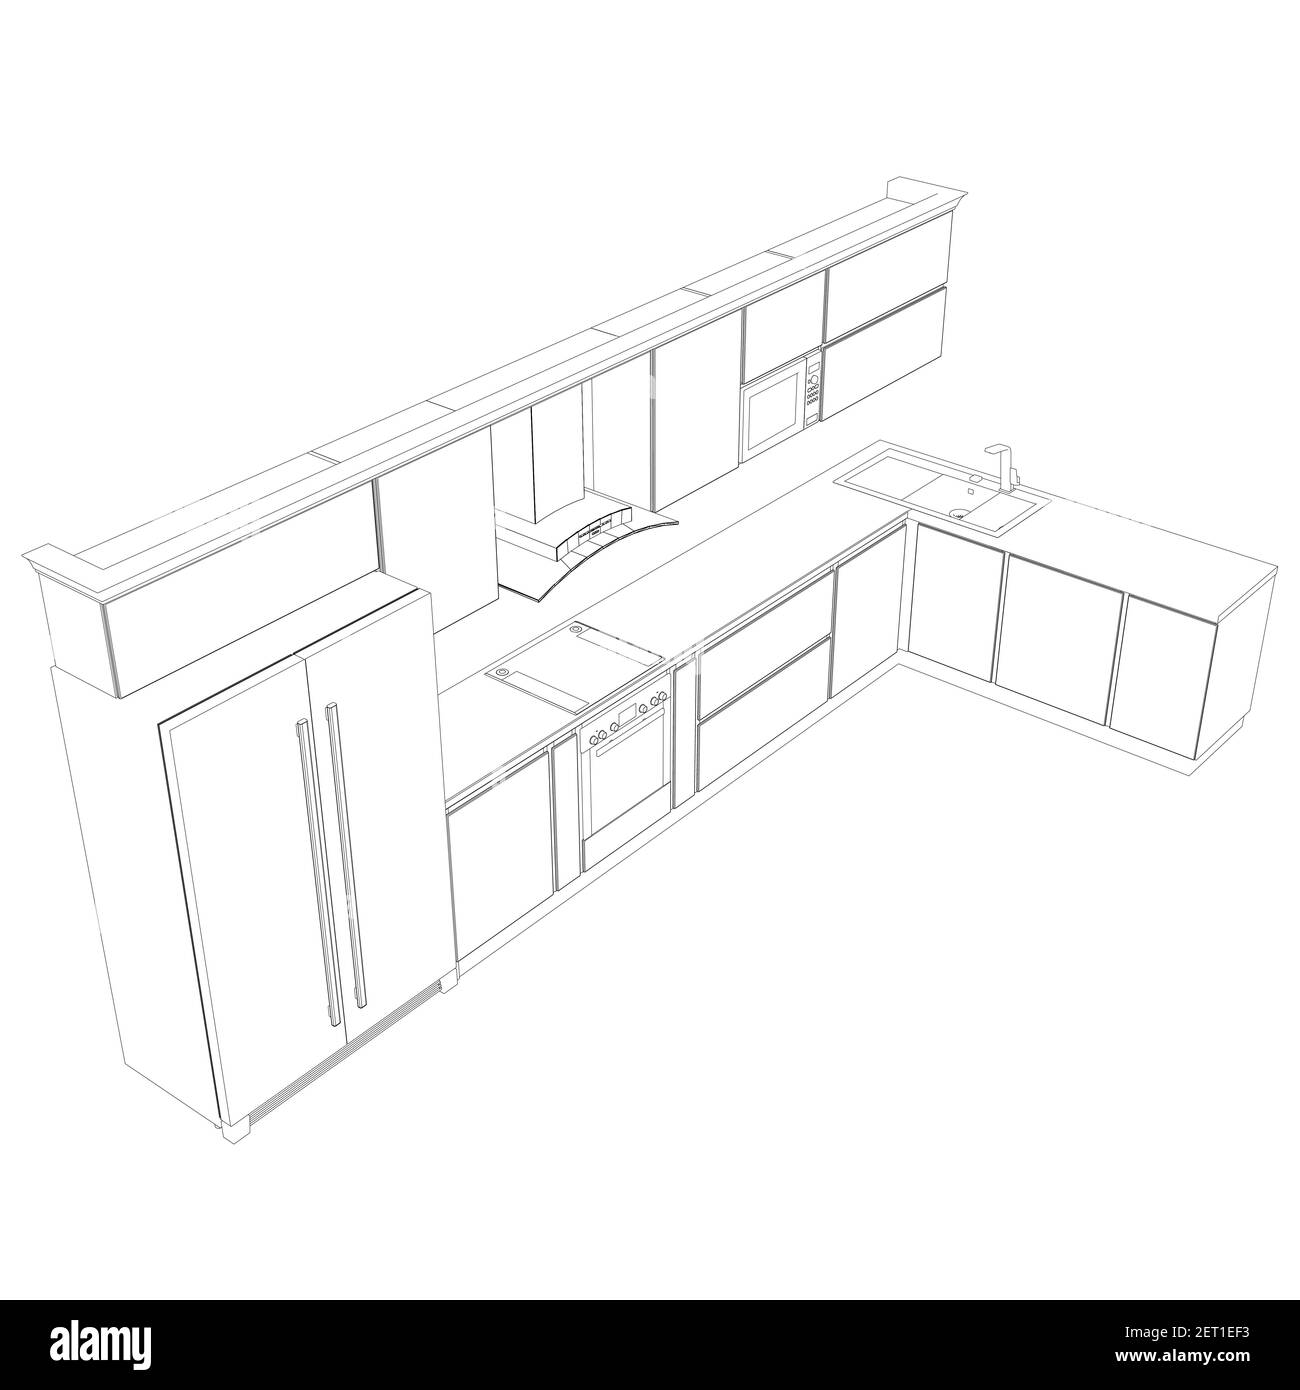 The contour of the kitchen set. Isometric view. 3D. Vector illustration ...